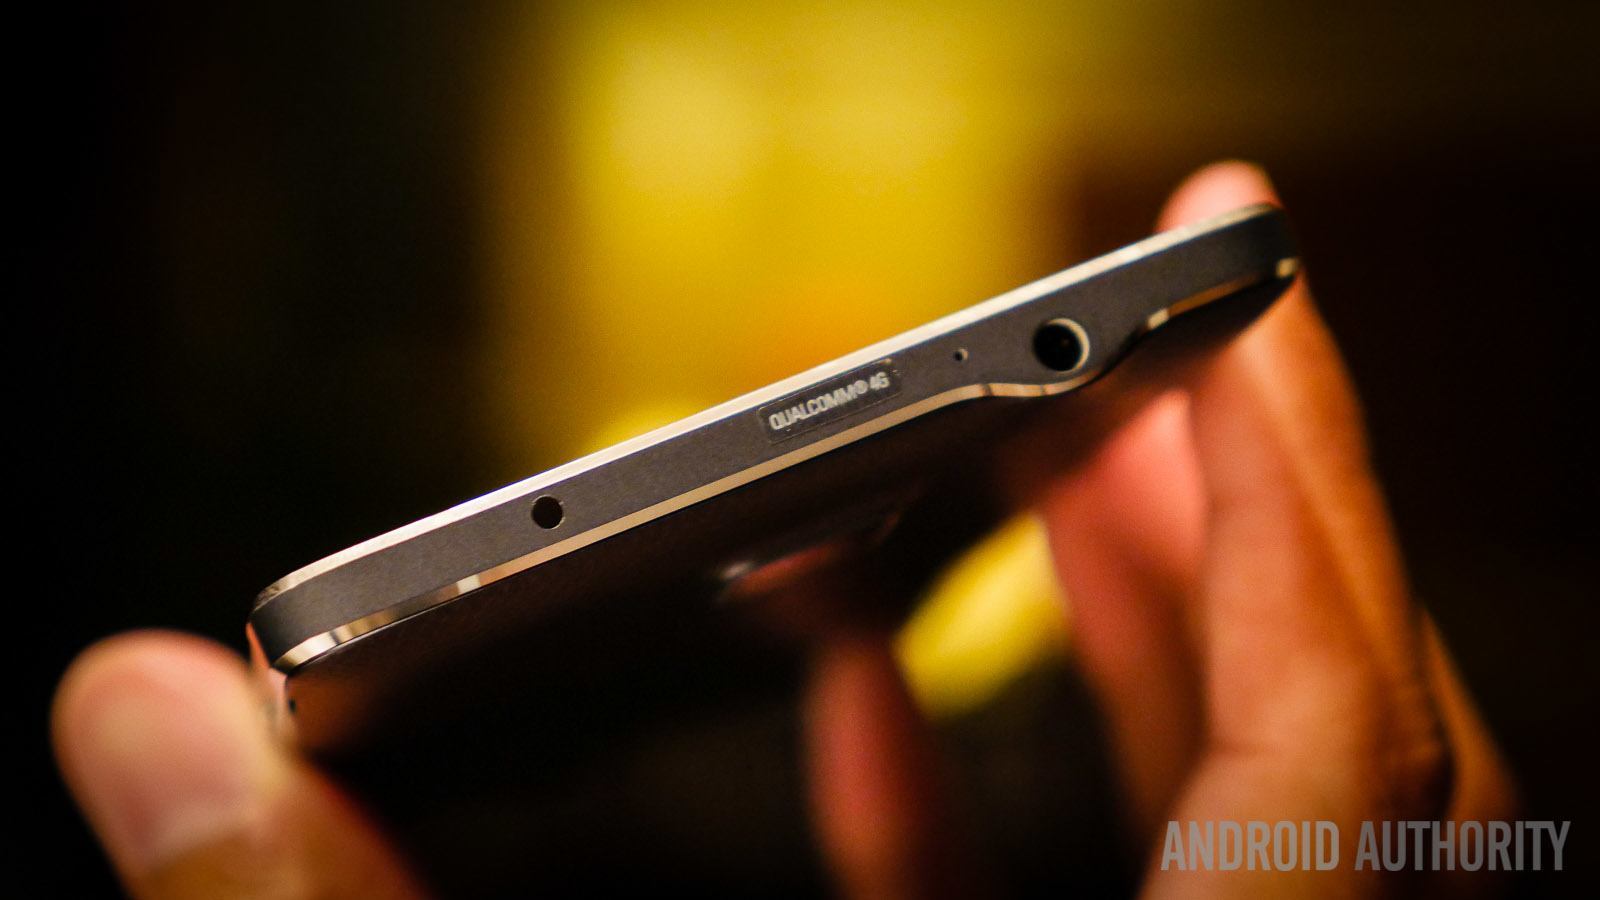 samsung galaxy note 4 first impressions (18 of 20)